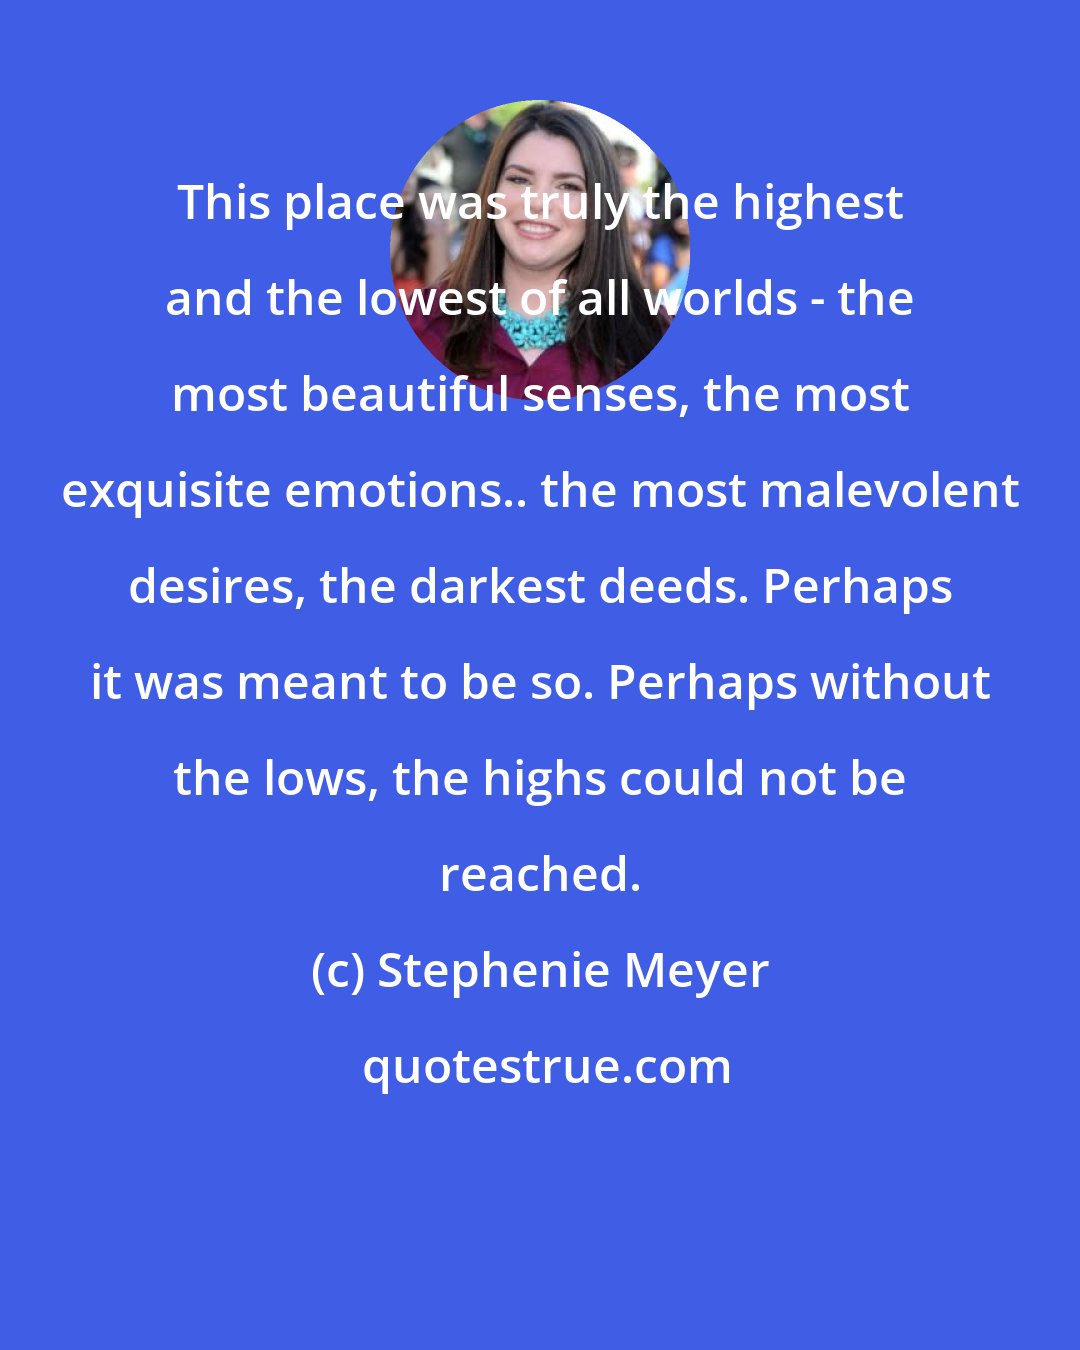 Stephenie Meyer: This place was truly the highest and the lowest of all worlds - the most beautiful senses, the most exquisite emotions.. the most malevolent desires, the darkest deeds. Perhaps it was meant to be so. Perhaps without the lows, the highs could not be reached.